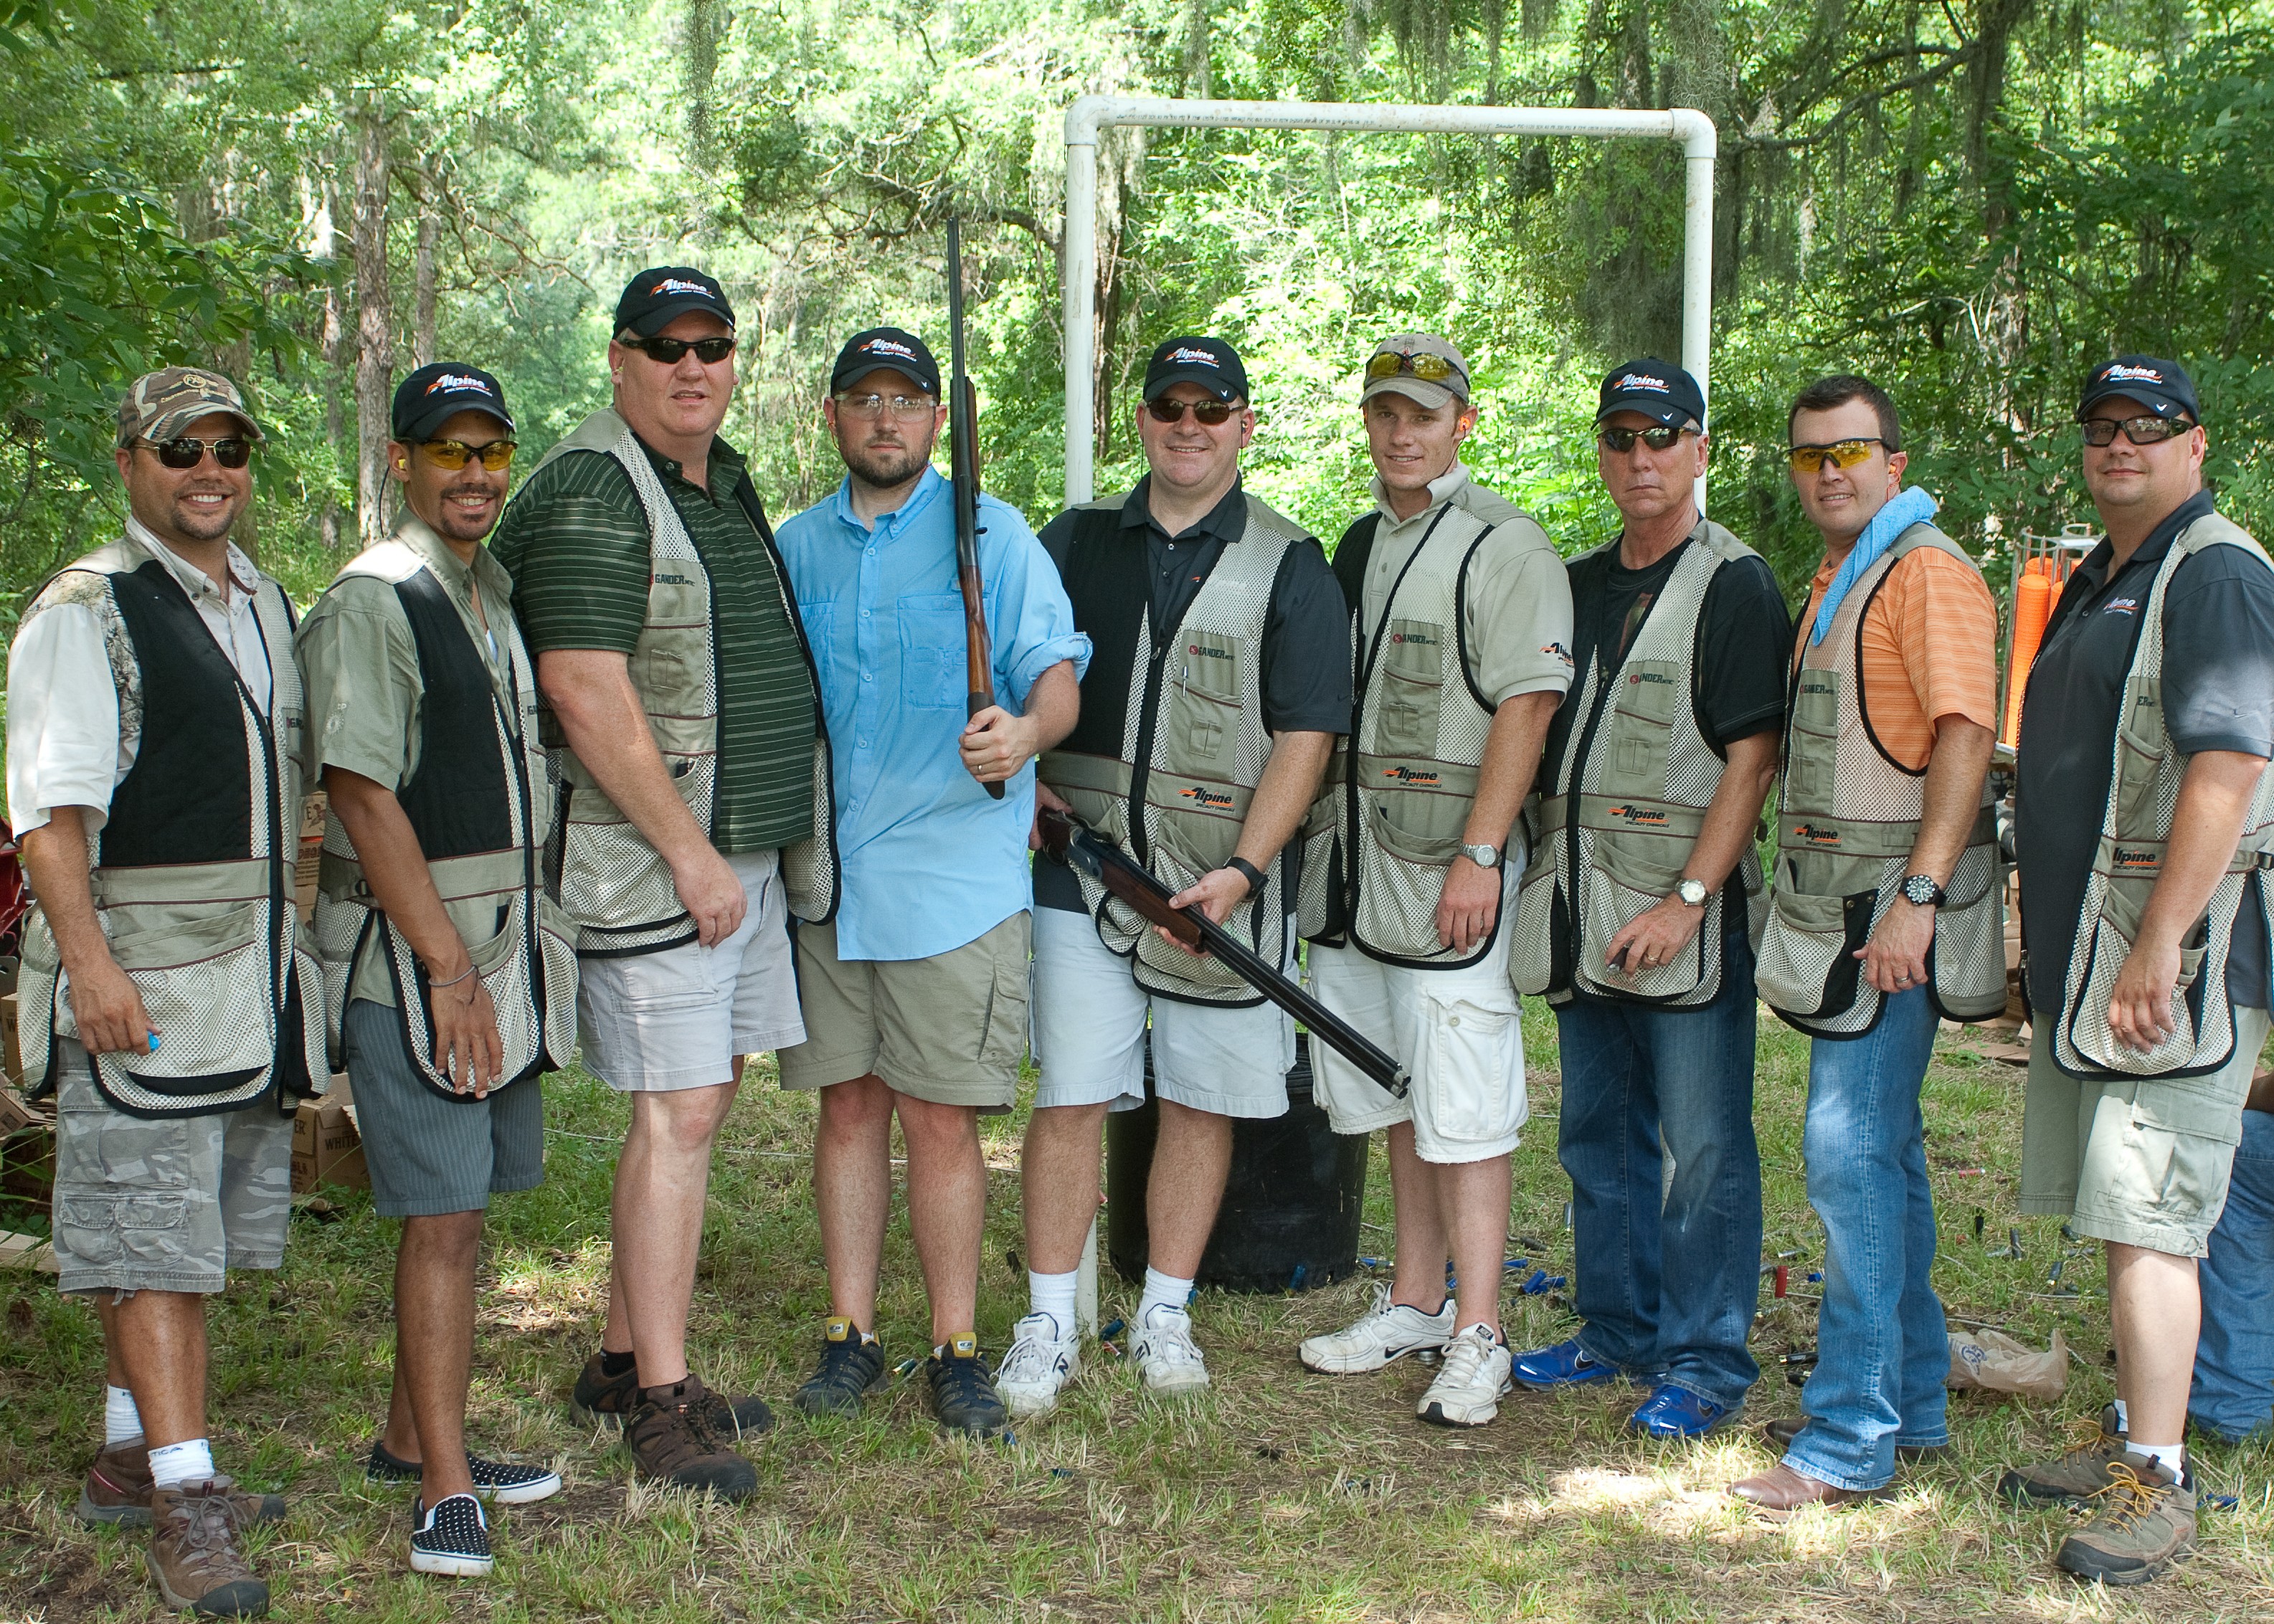 Sporting Clays Tournament